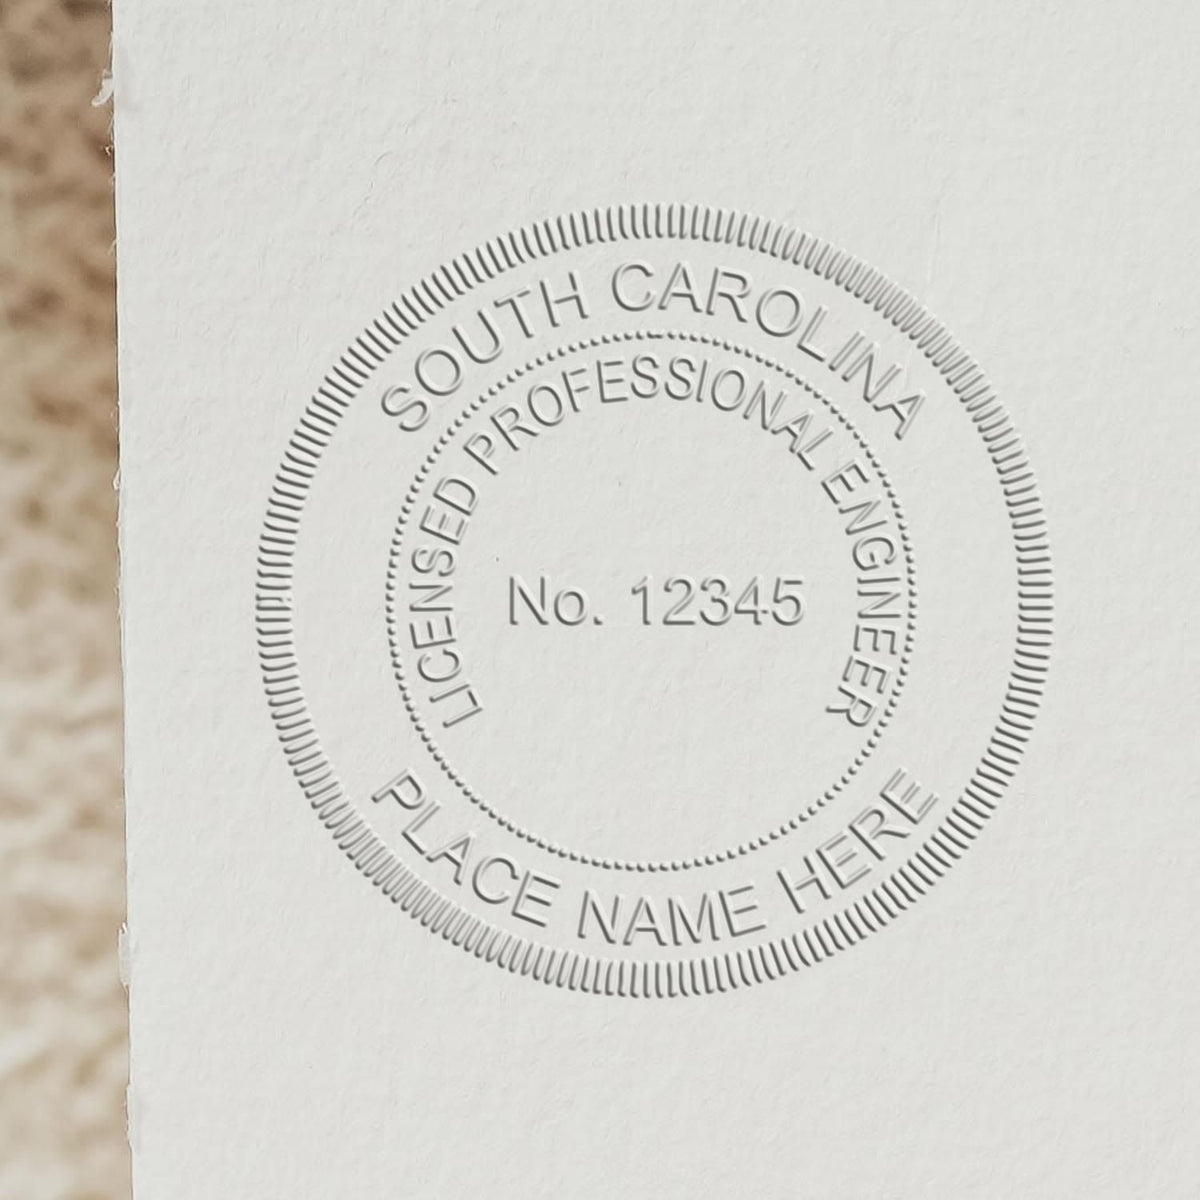 A stamped impression of the Long Reach South Carolina PE Seal in this stylish lifestyle photo, setting the tone for a unique and personalized product.